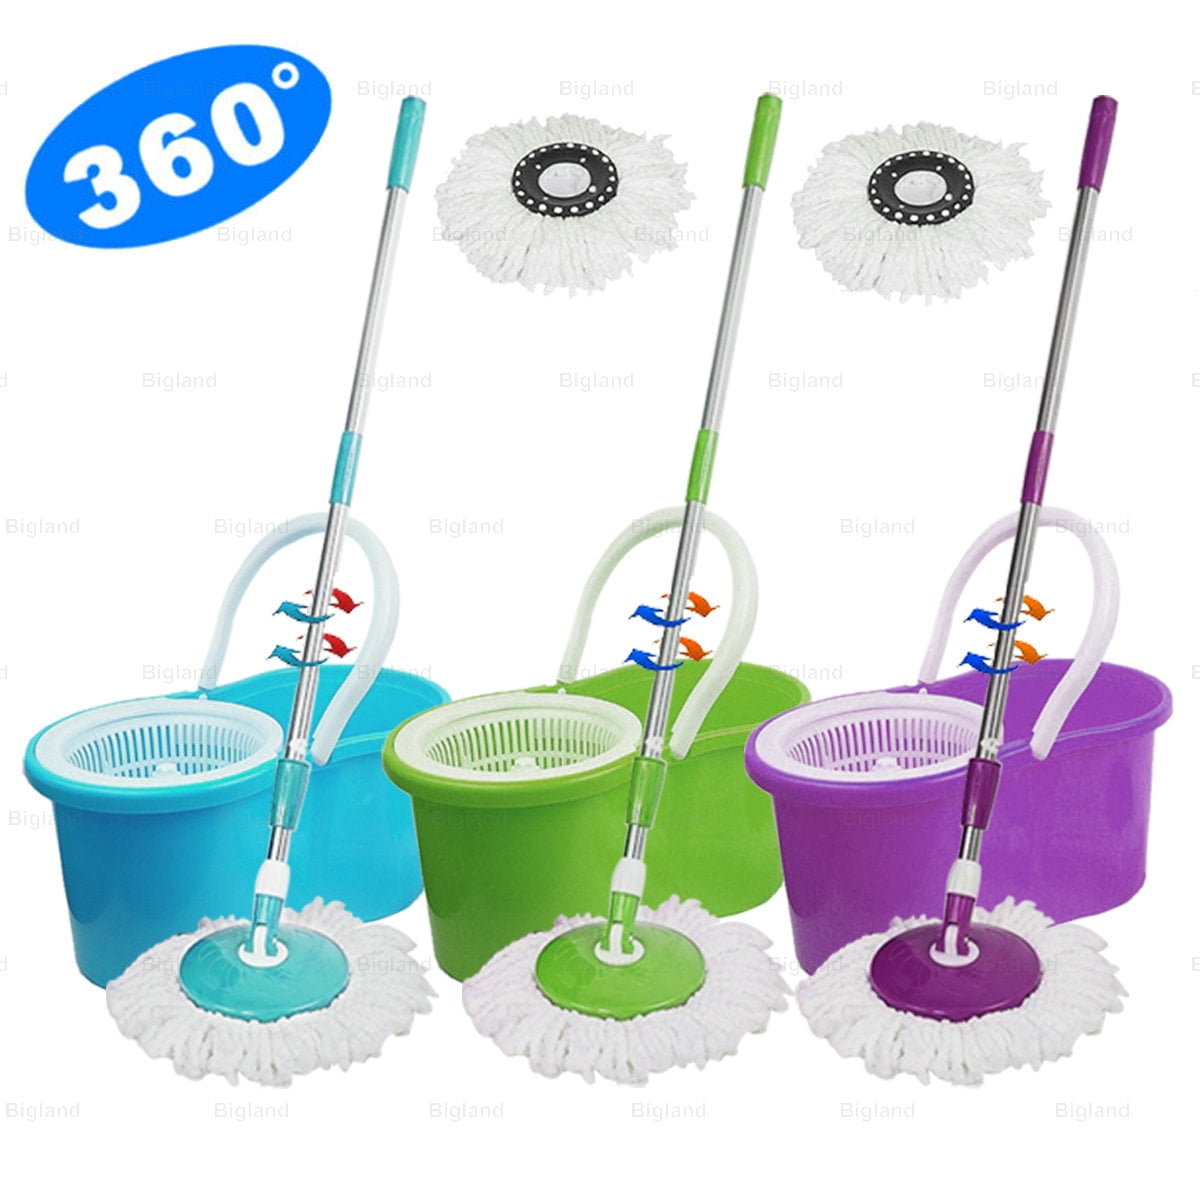 360° Spin Mop & Bucket Set Microfibre Rotating With 1 Dry Mop Head Floor Cleaner 